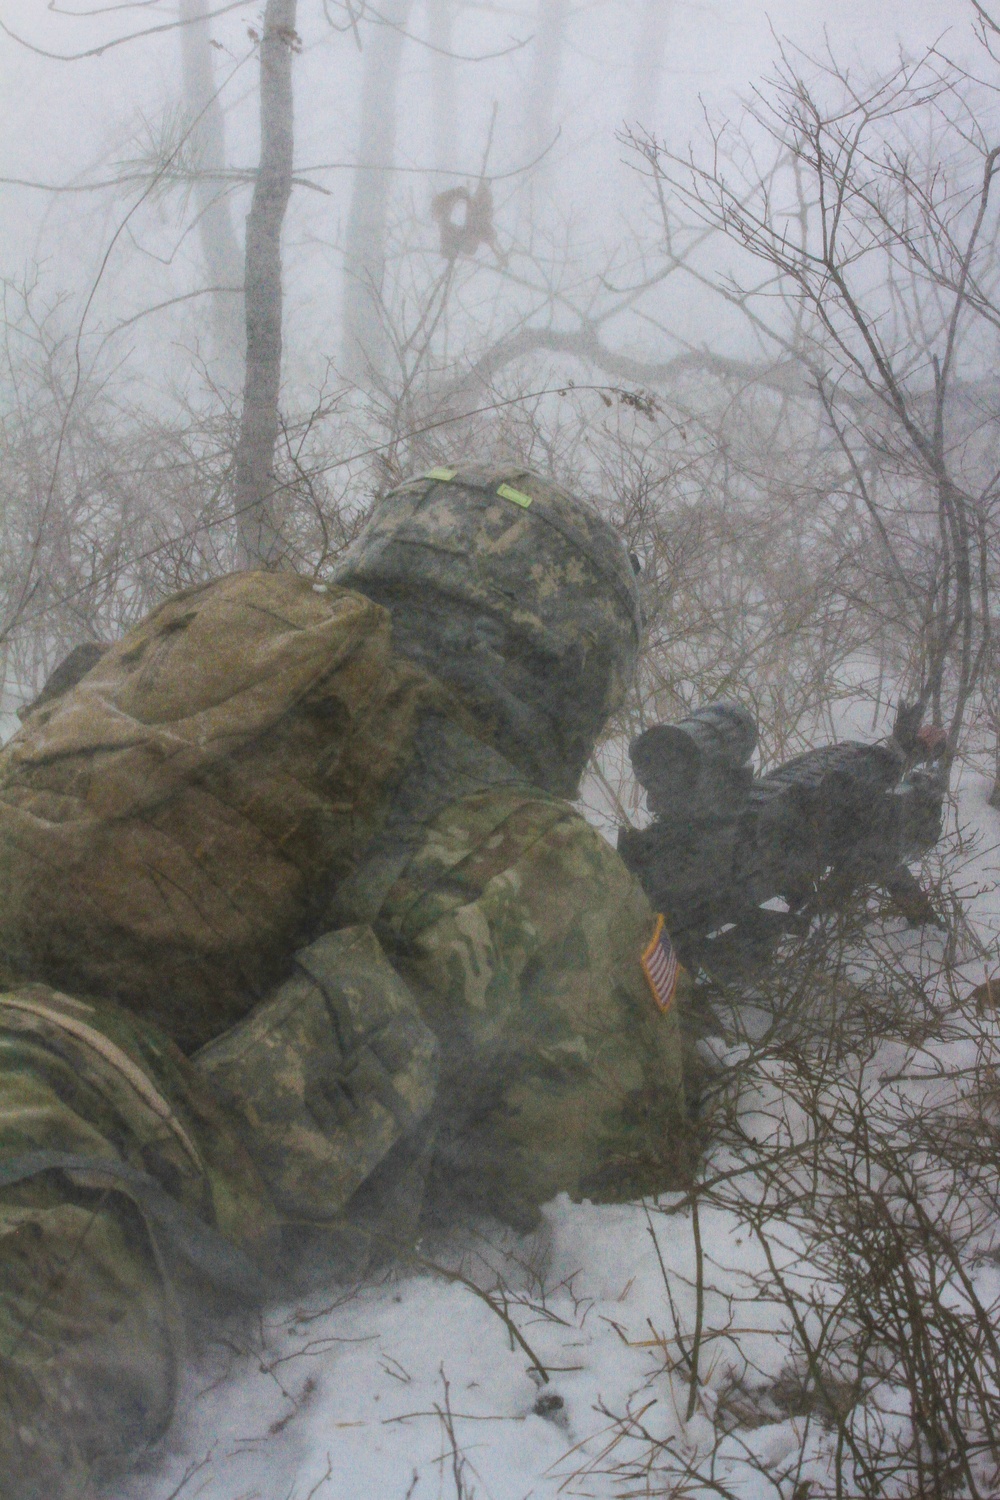 National Guard &amp; Marines work together during exercise